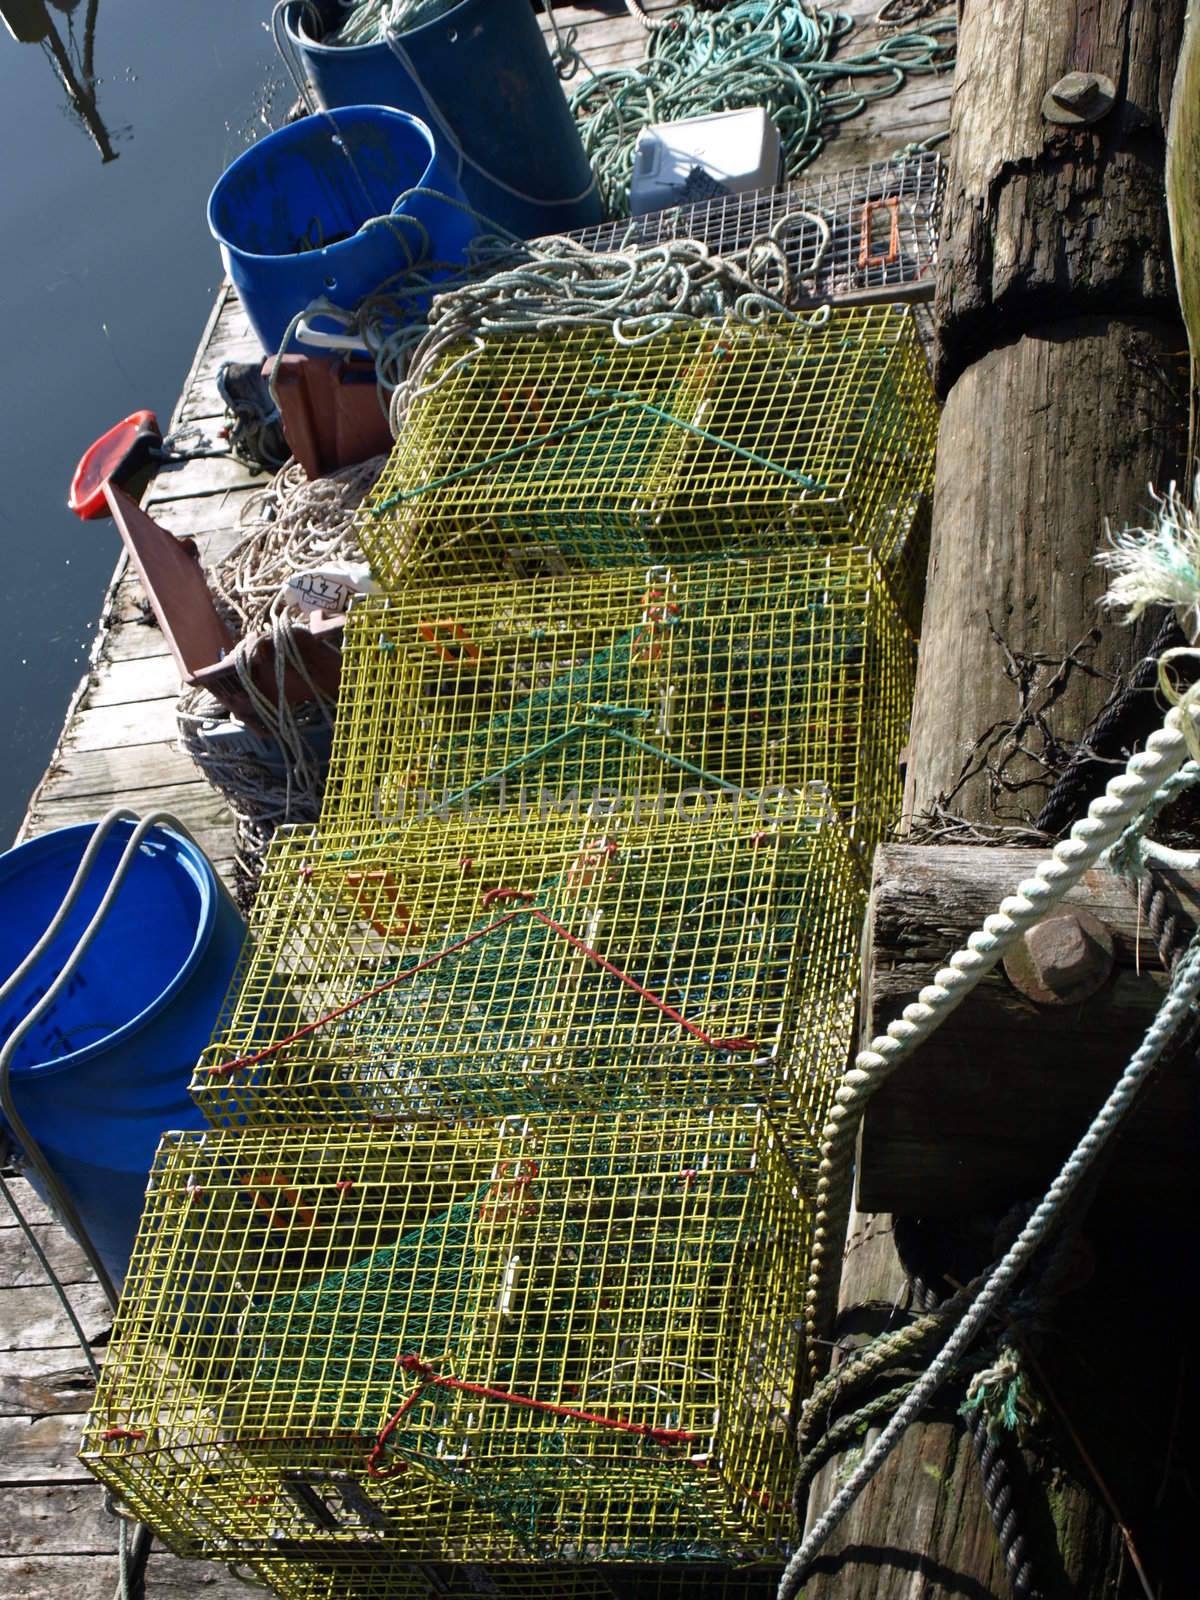 Lobster traps by northwoodsphoto